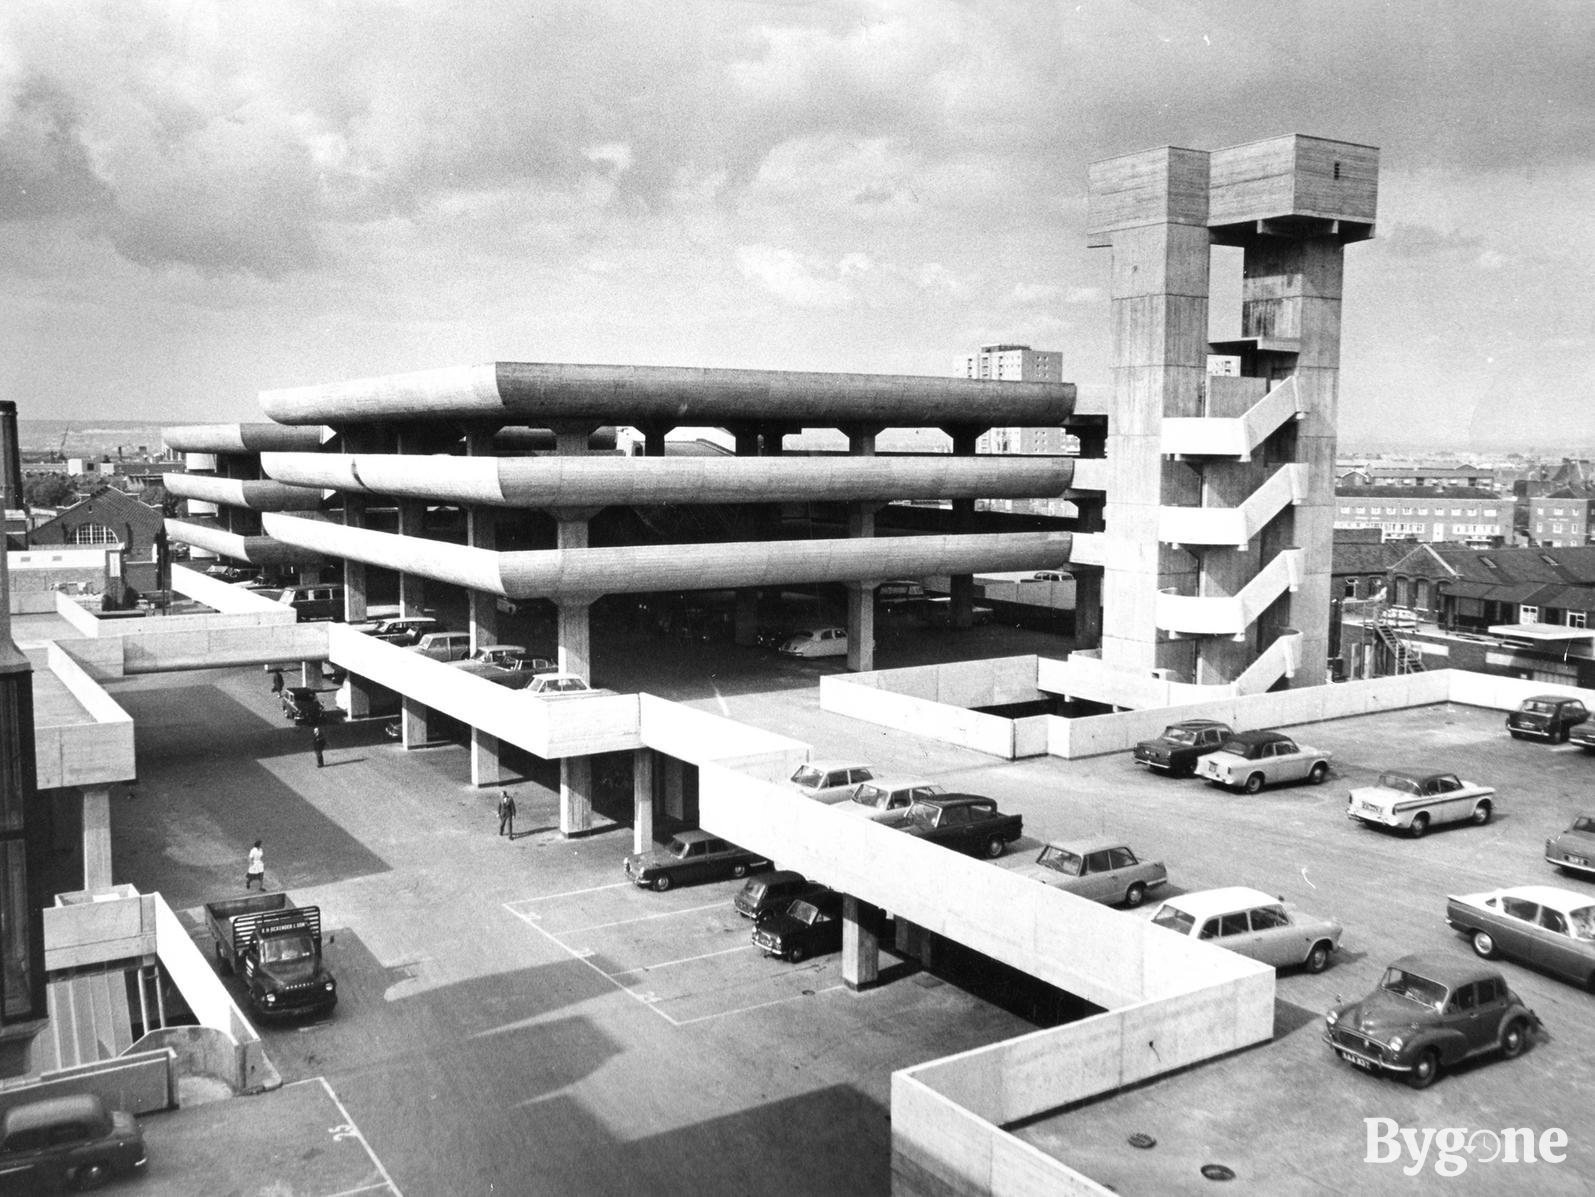 The Tricorn in 1966